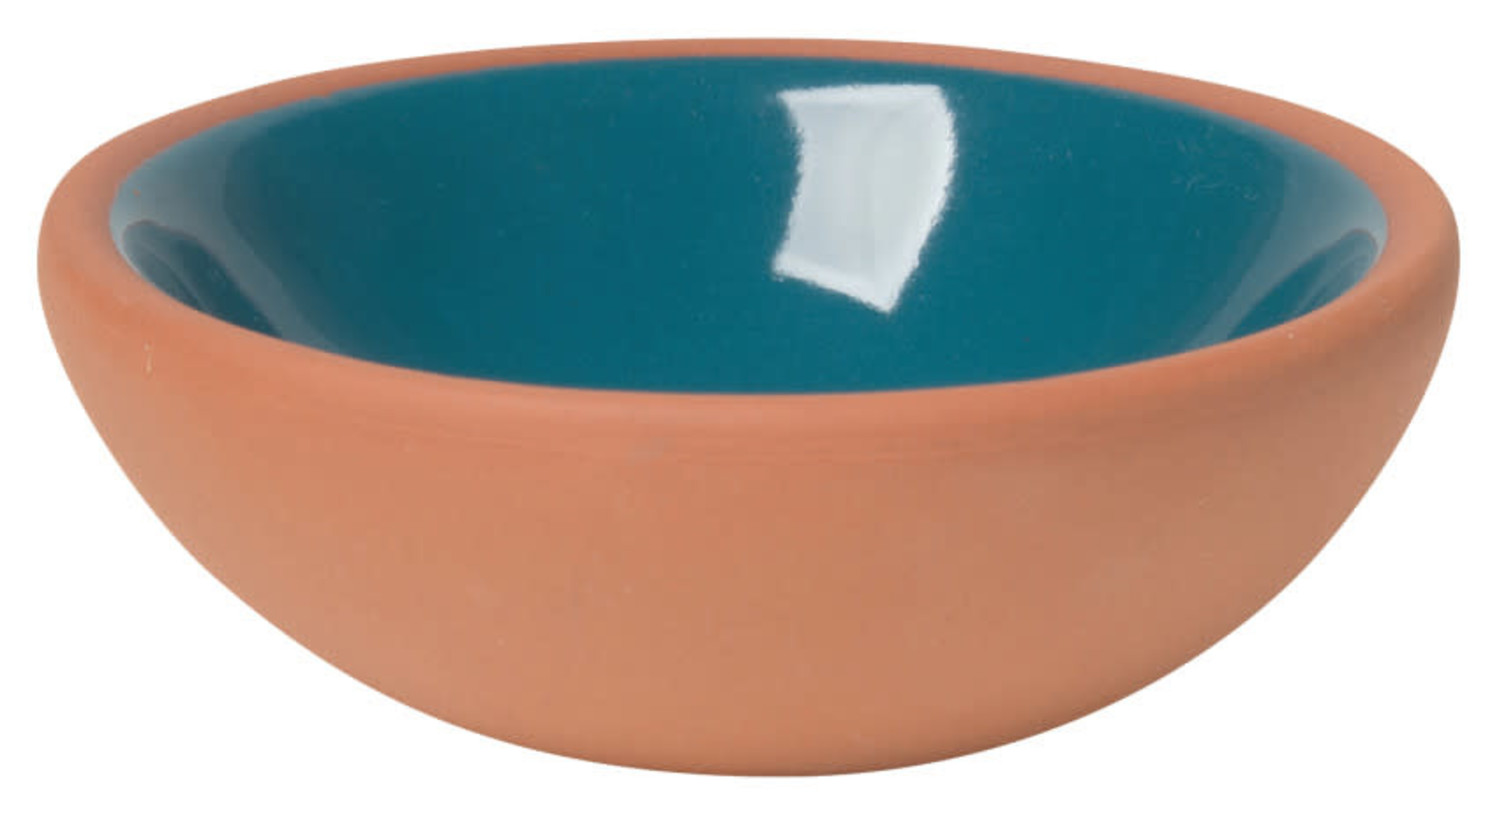 Terracotta Pinch Bowls, set of 6 - Whisk